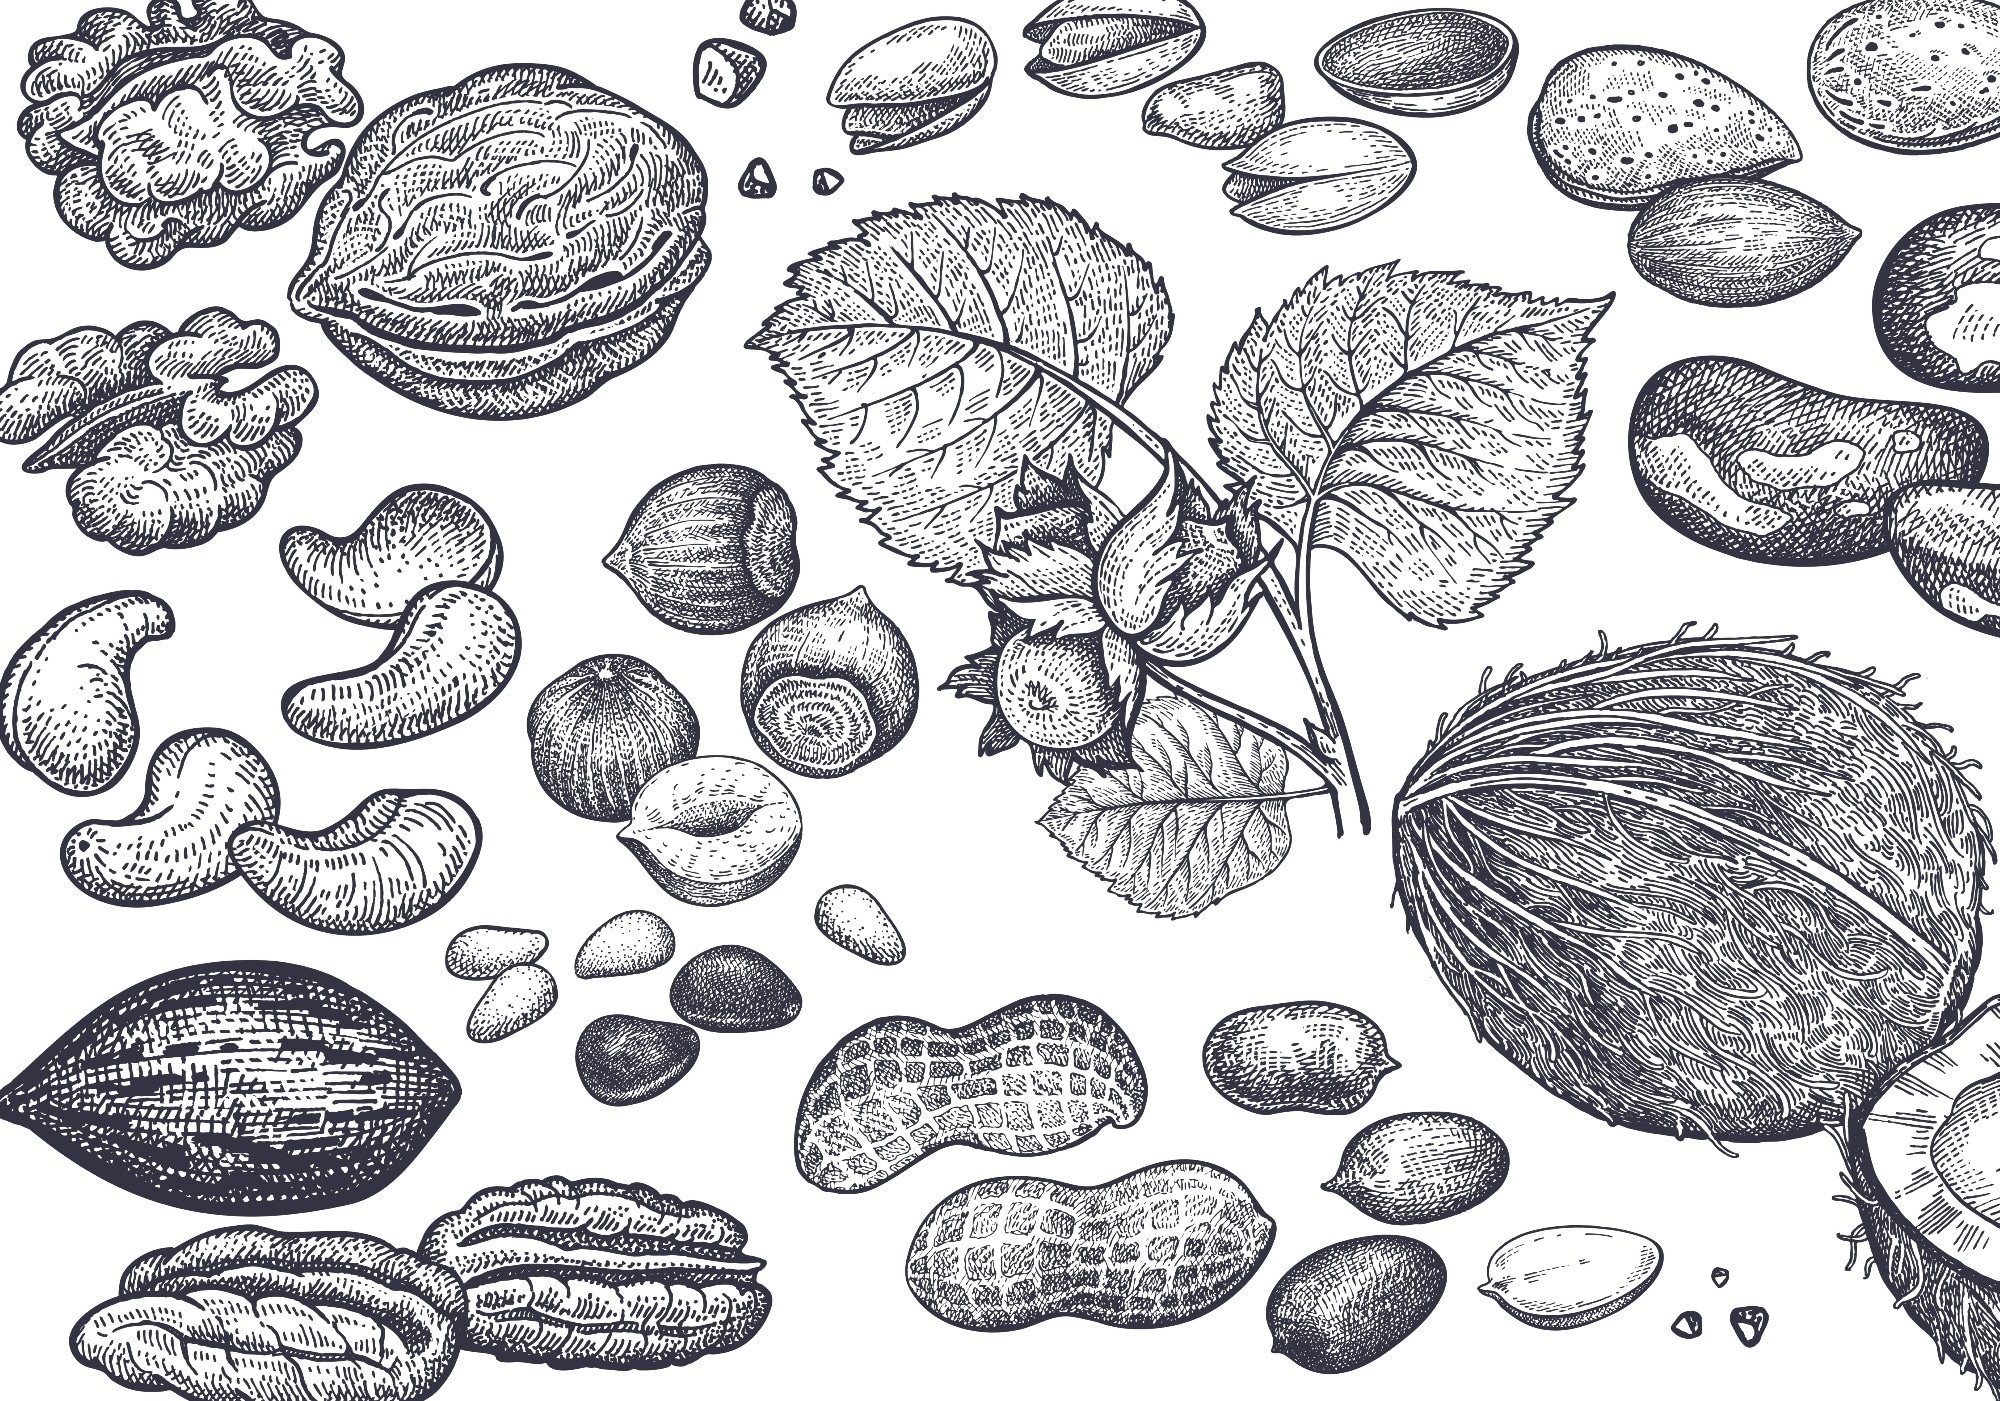 Editorial: Where We Are and Where We Are Going in Nut Research. Image Credit: mamita / Shutterstock